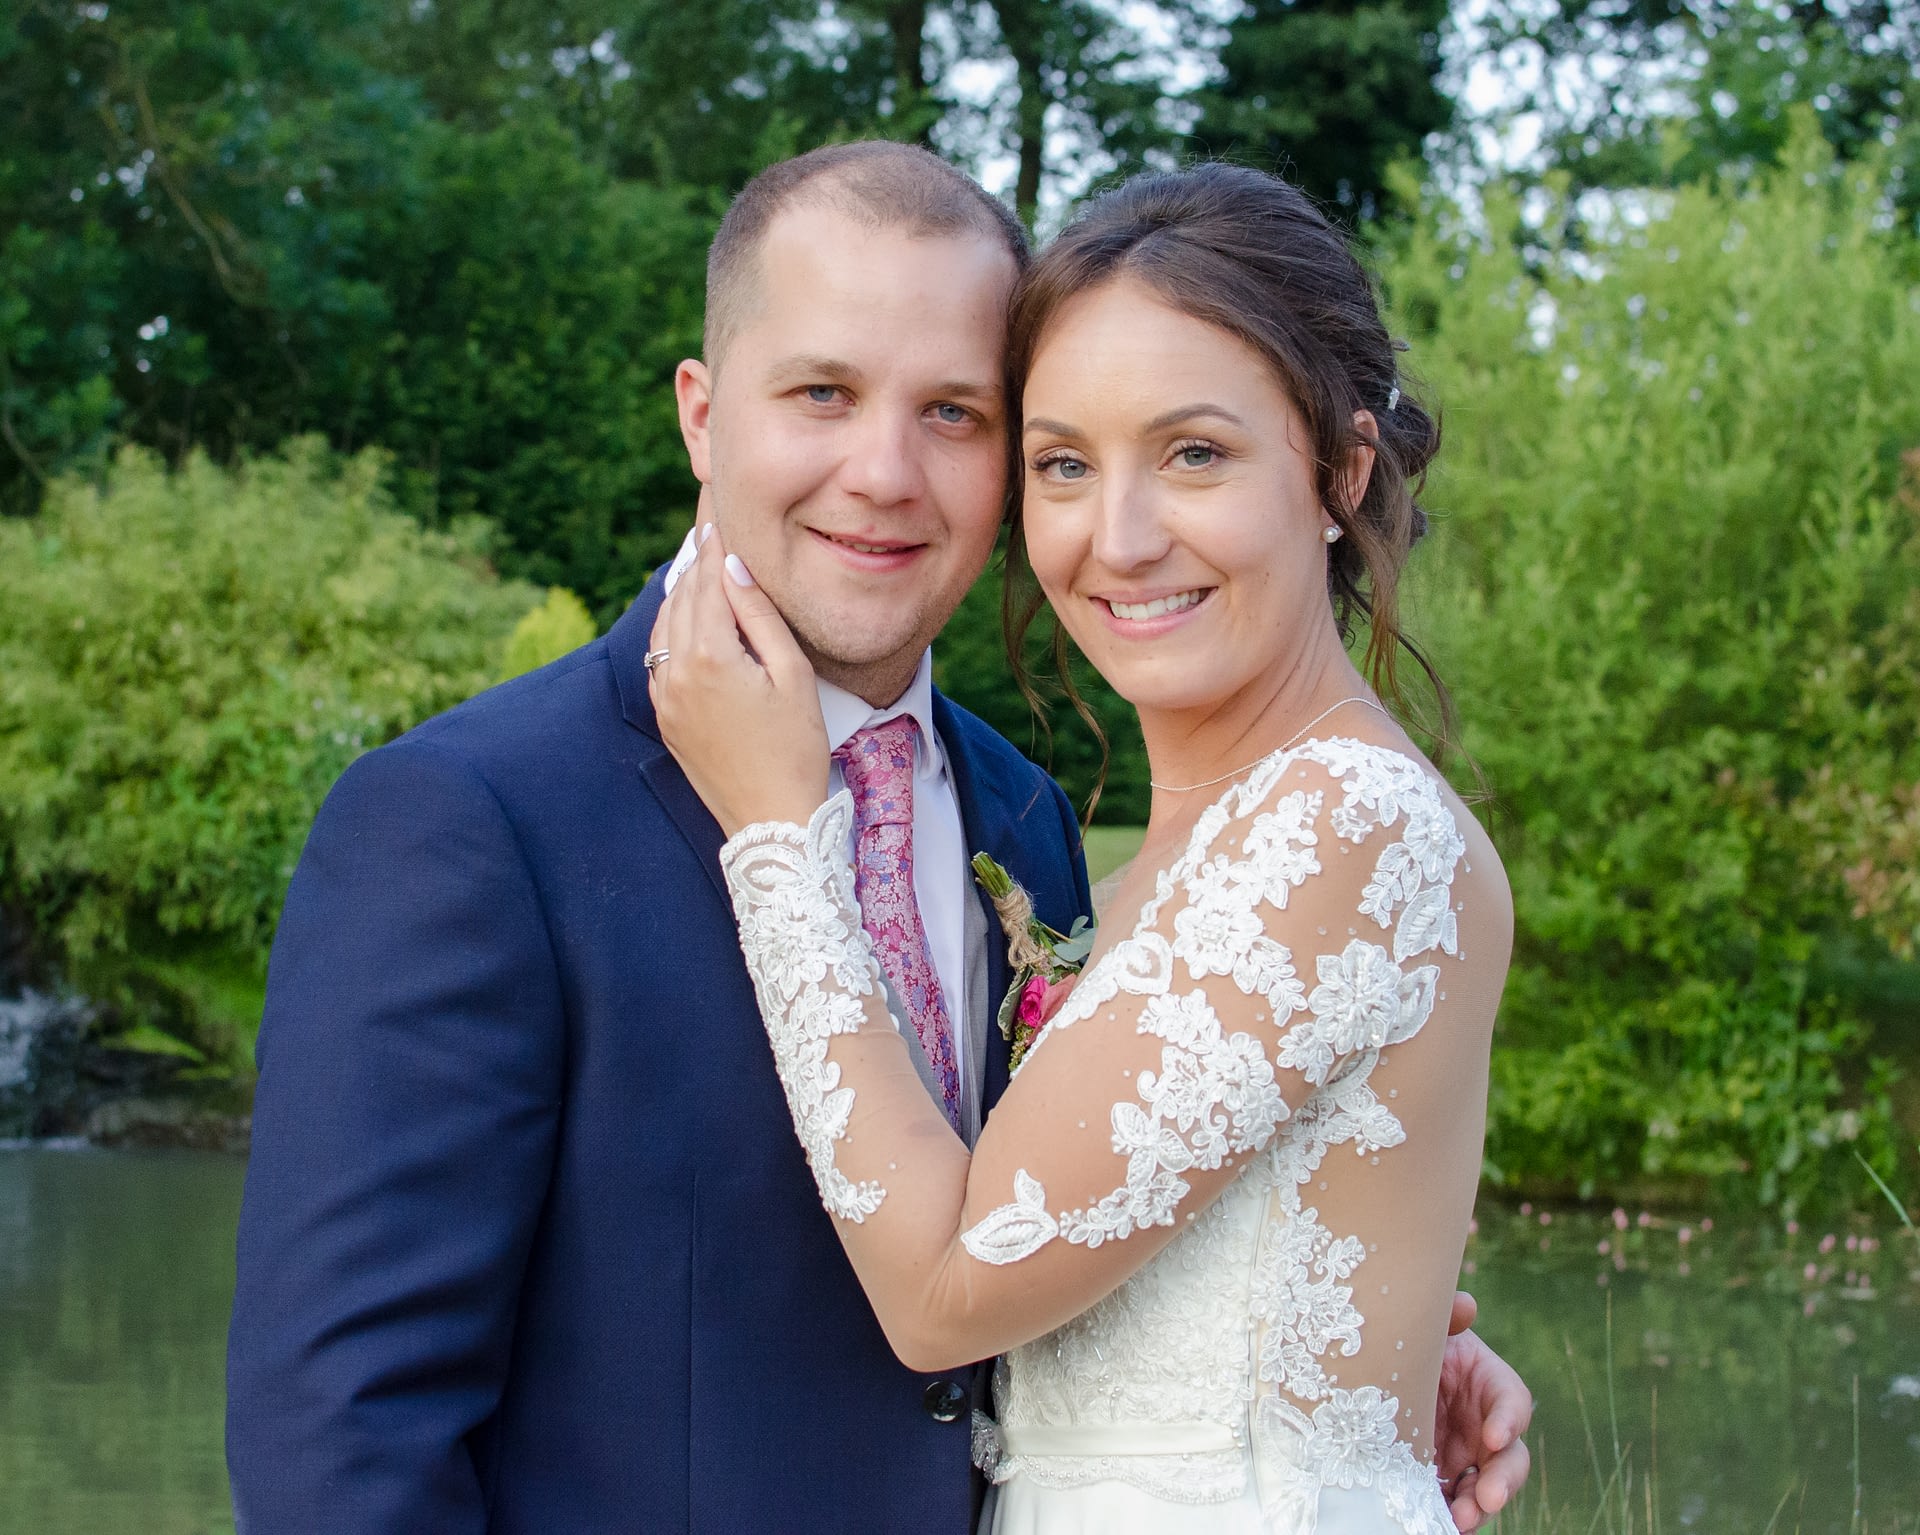 Oxted Wedding Photography at Coltsford Mill